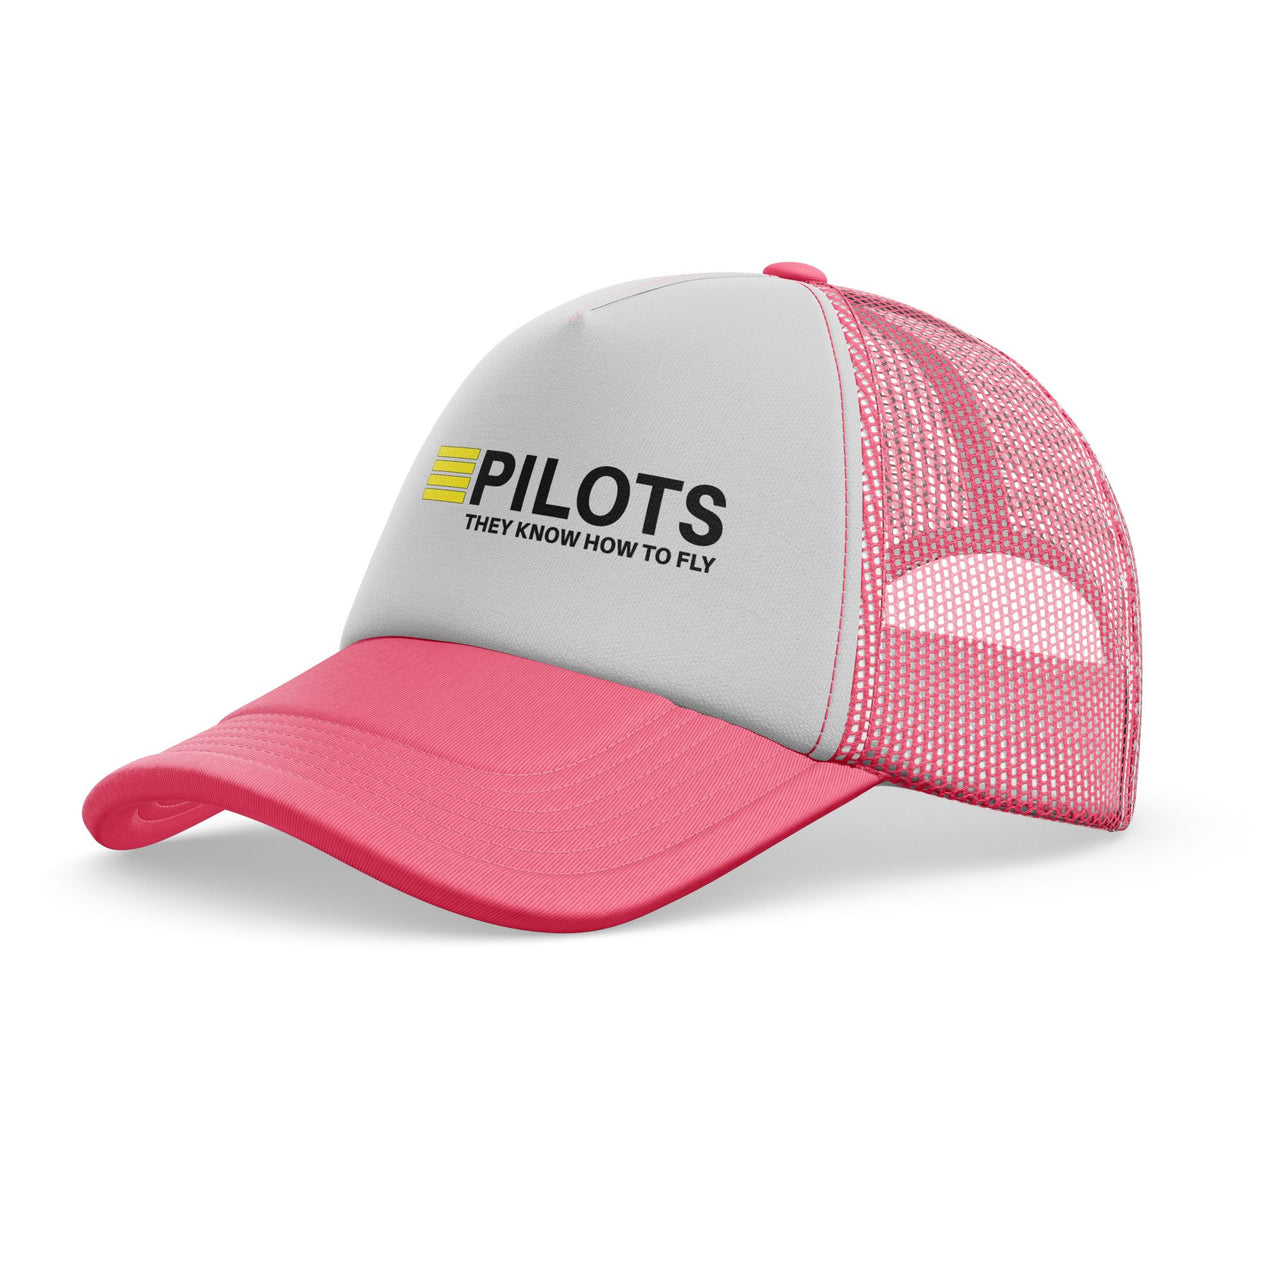 Pilots They Know How To Fly Designed Trucker Caps & Hats